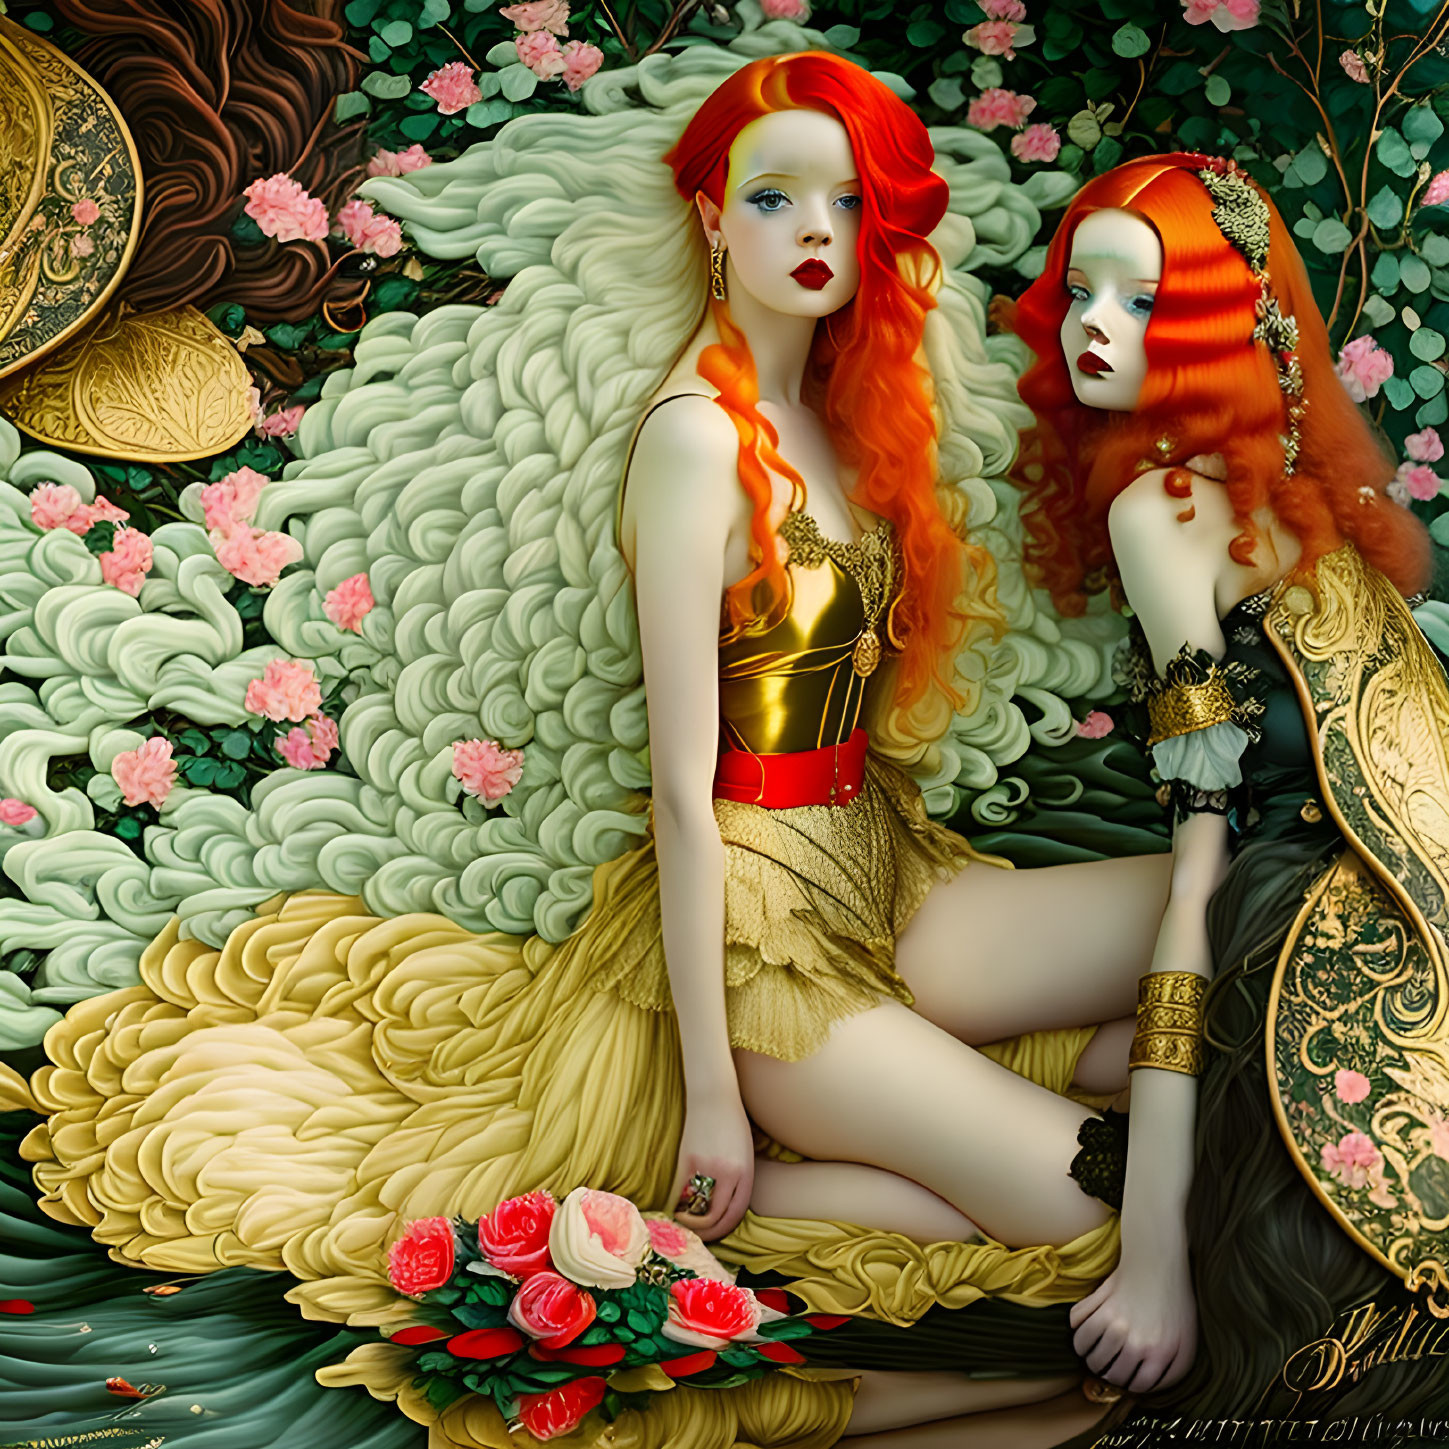 Stylized red-haired female figures in fantastical outfits among floral patterns